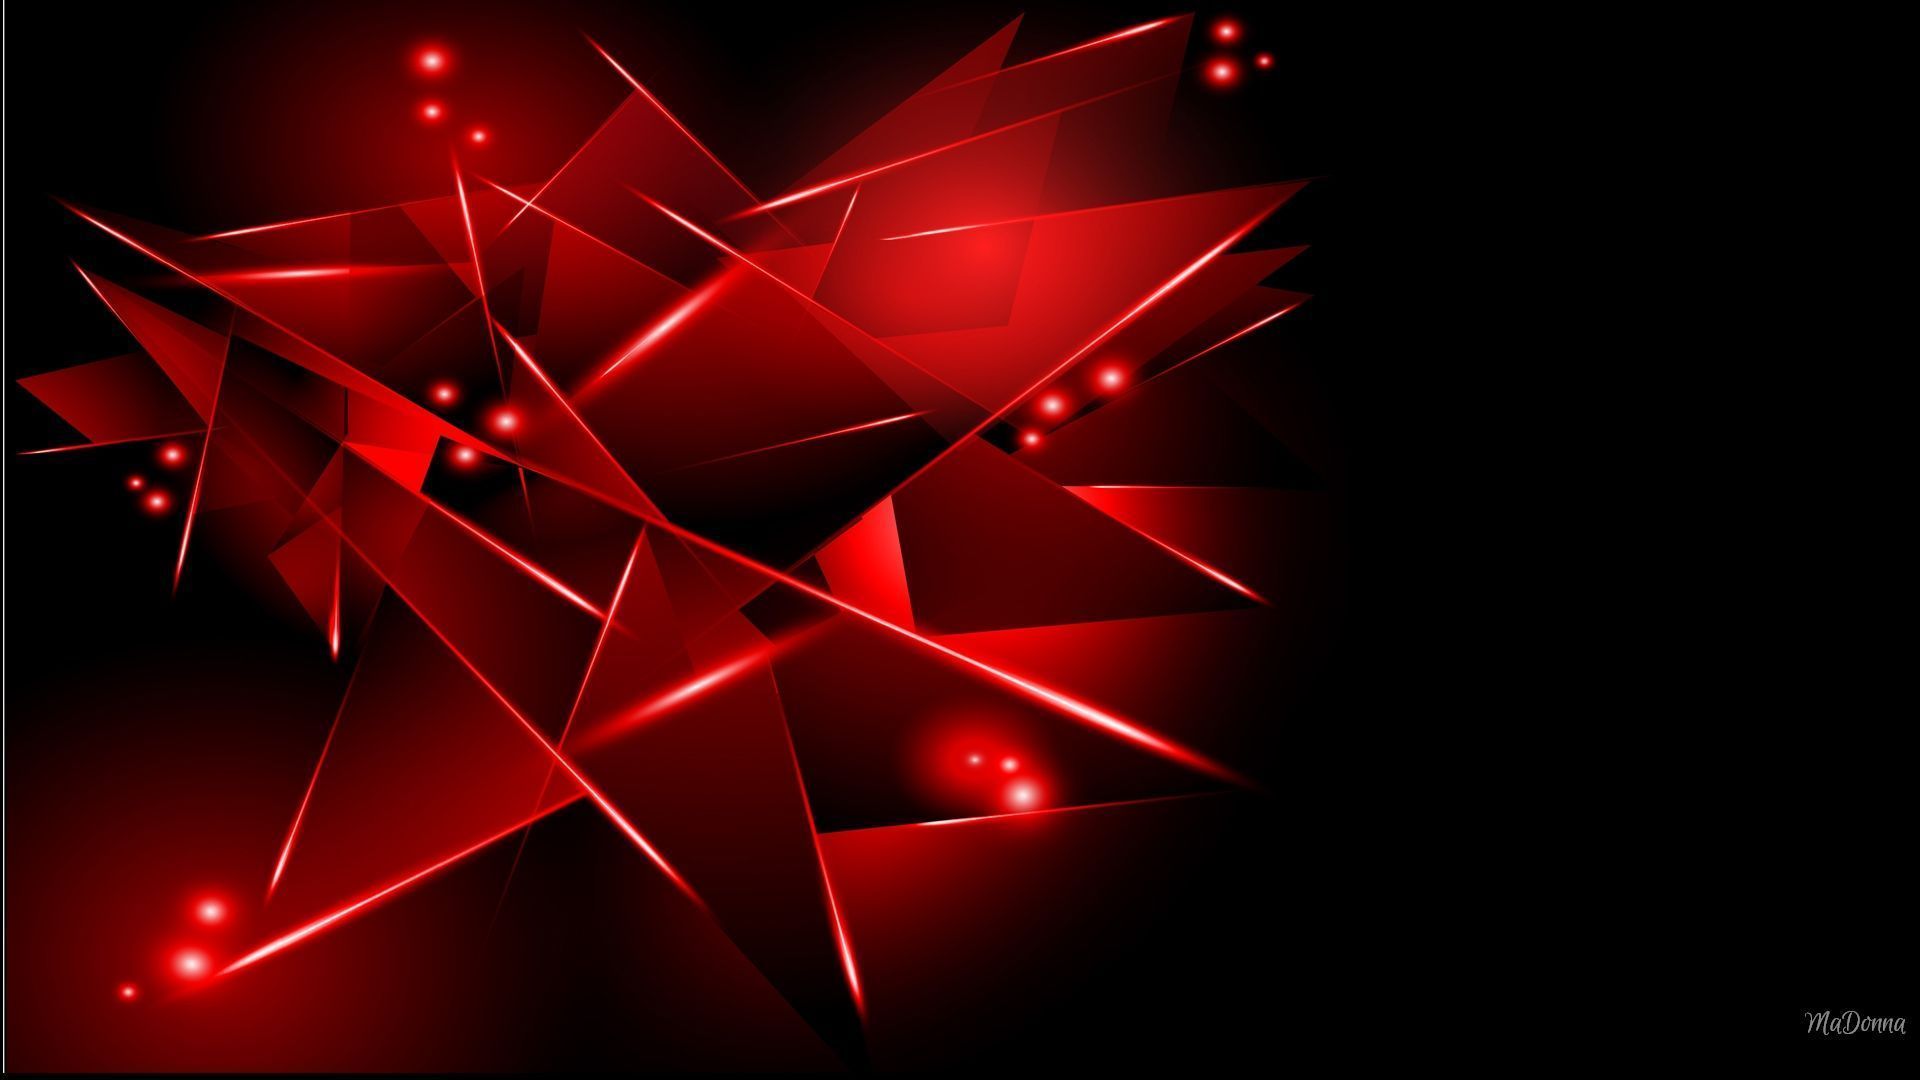 Black and Red Free Wallpaper 2315 Wallpaper Site